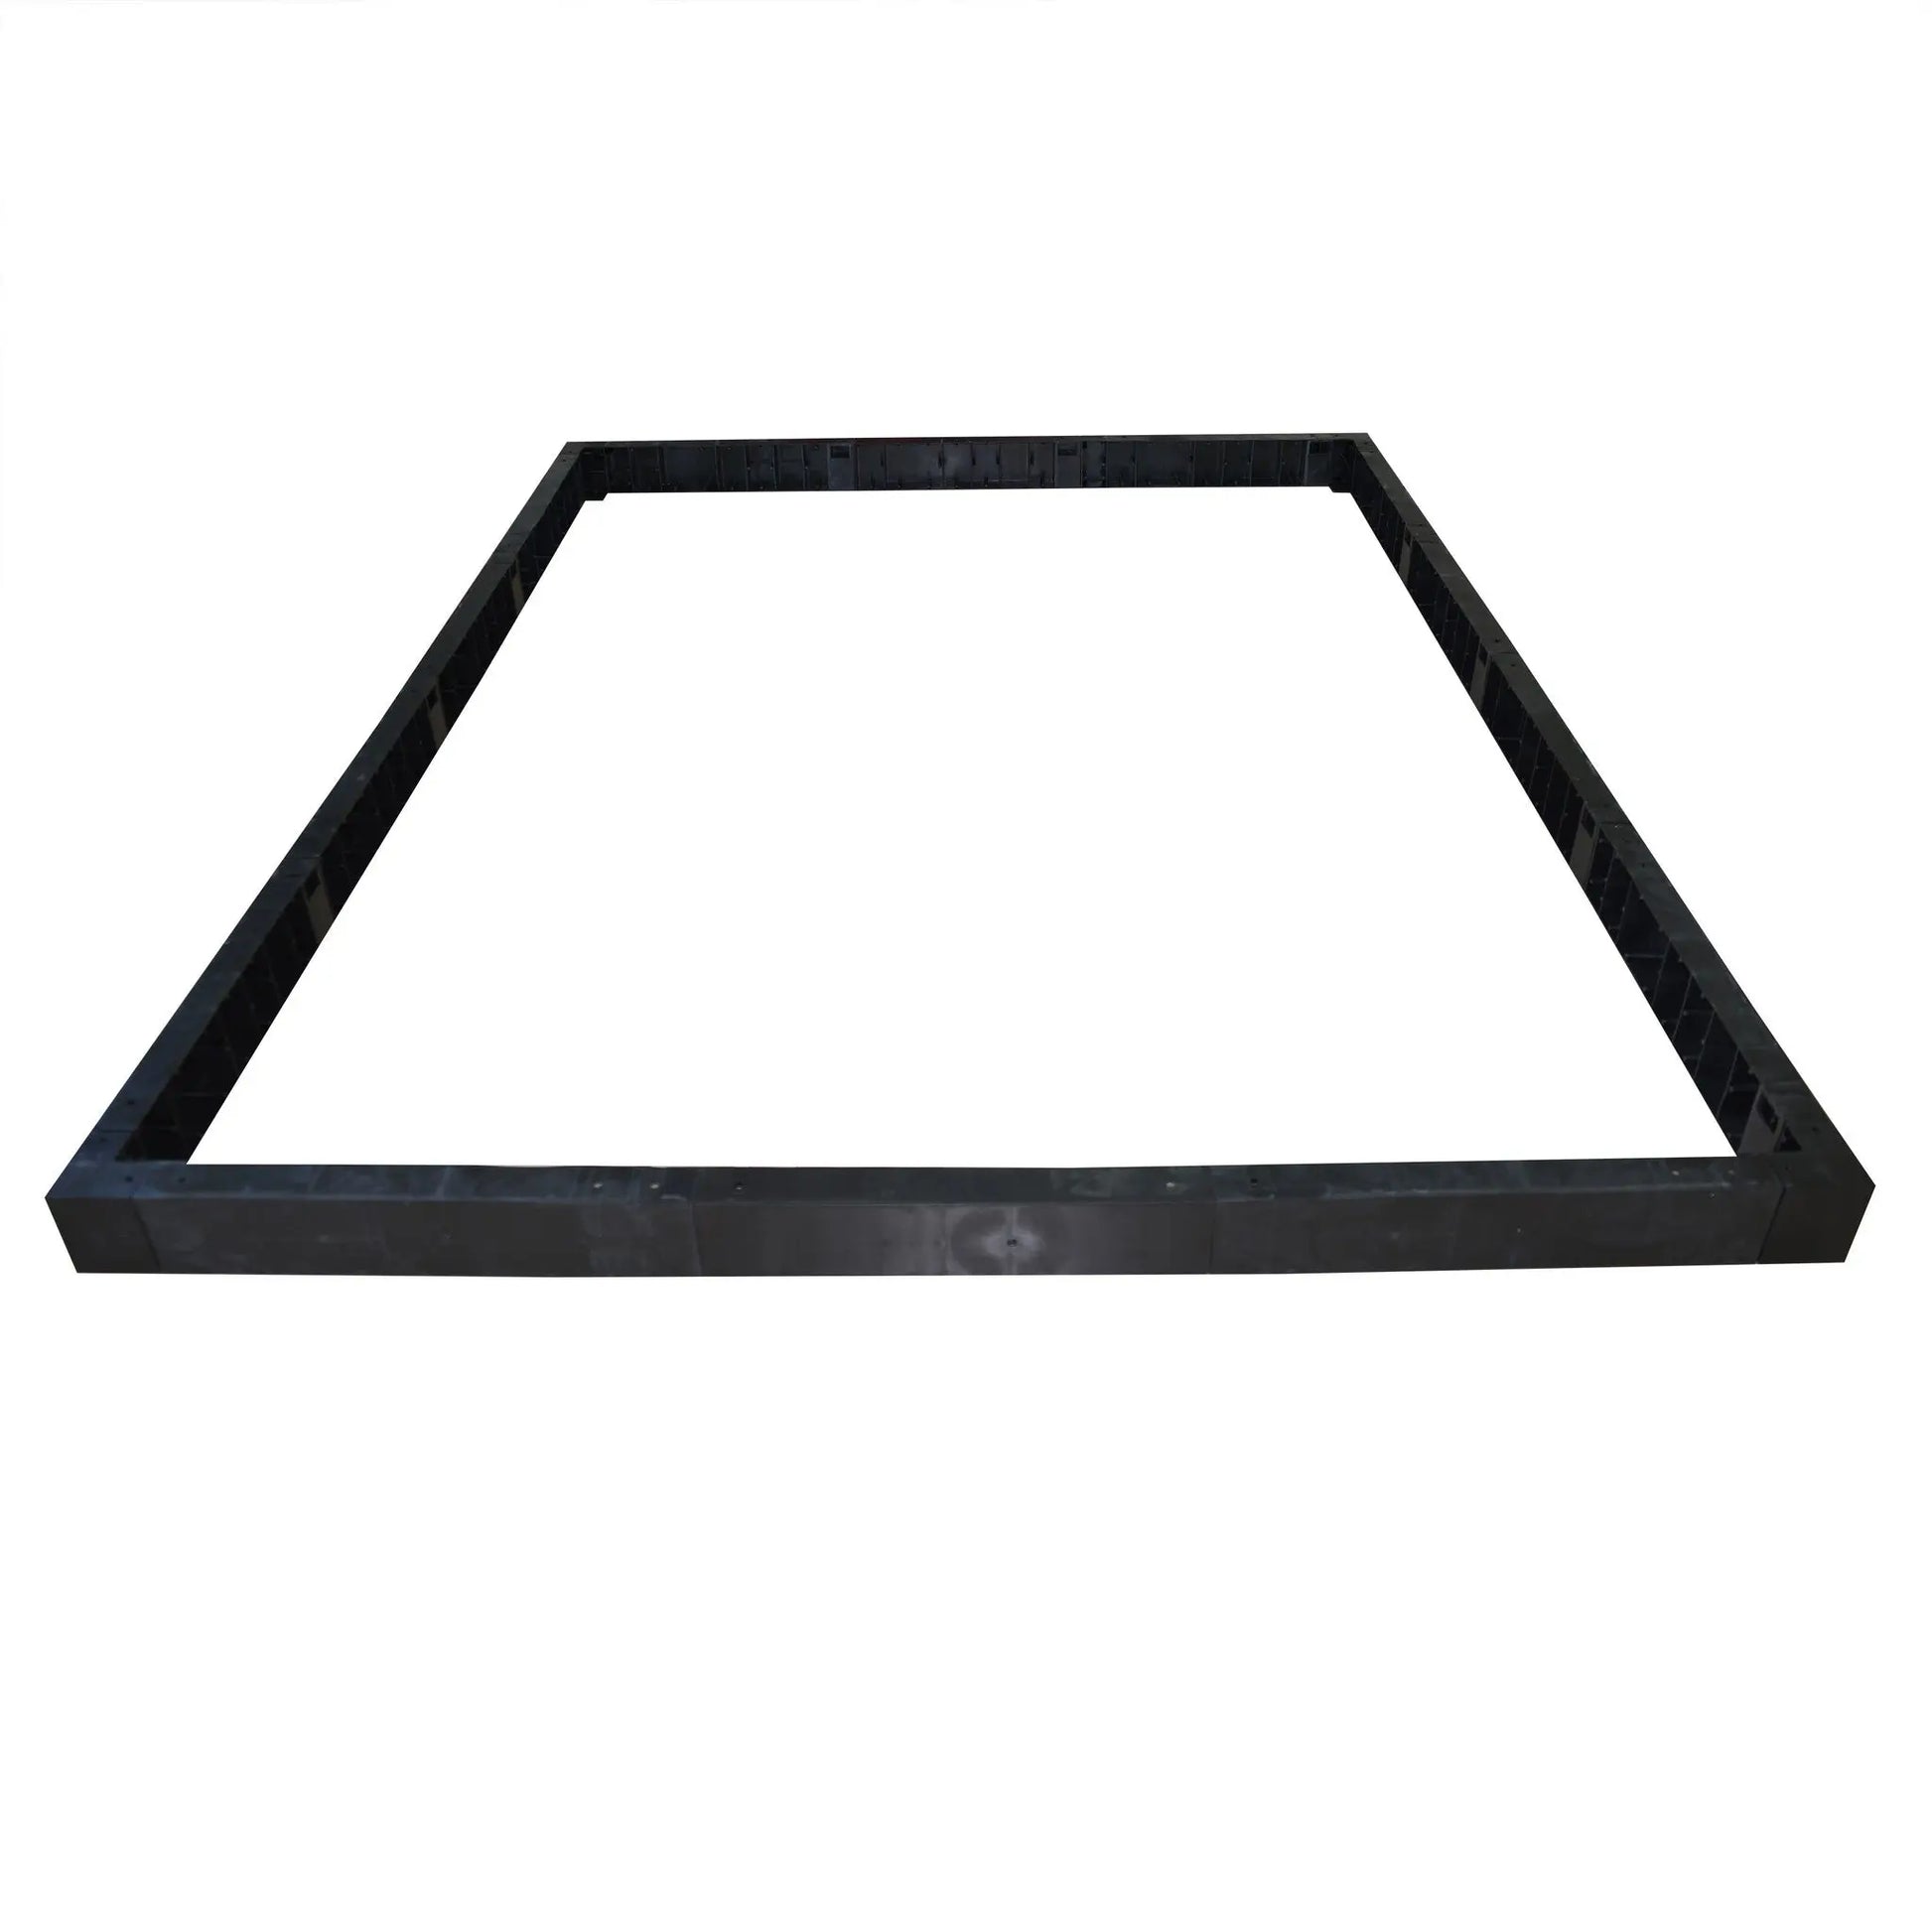 Mounting Base Kit 8x12 for Grand & Prestige Greenhouses Mounting Base Kits Canopia by Palram   